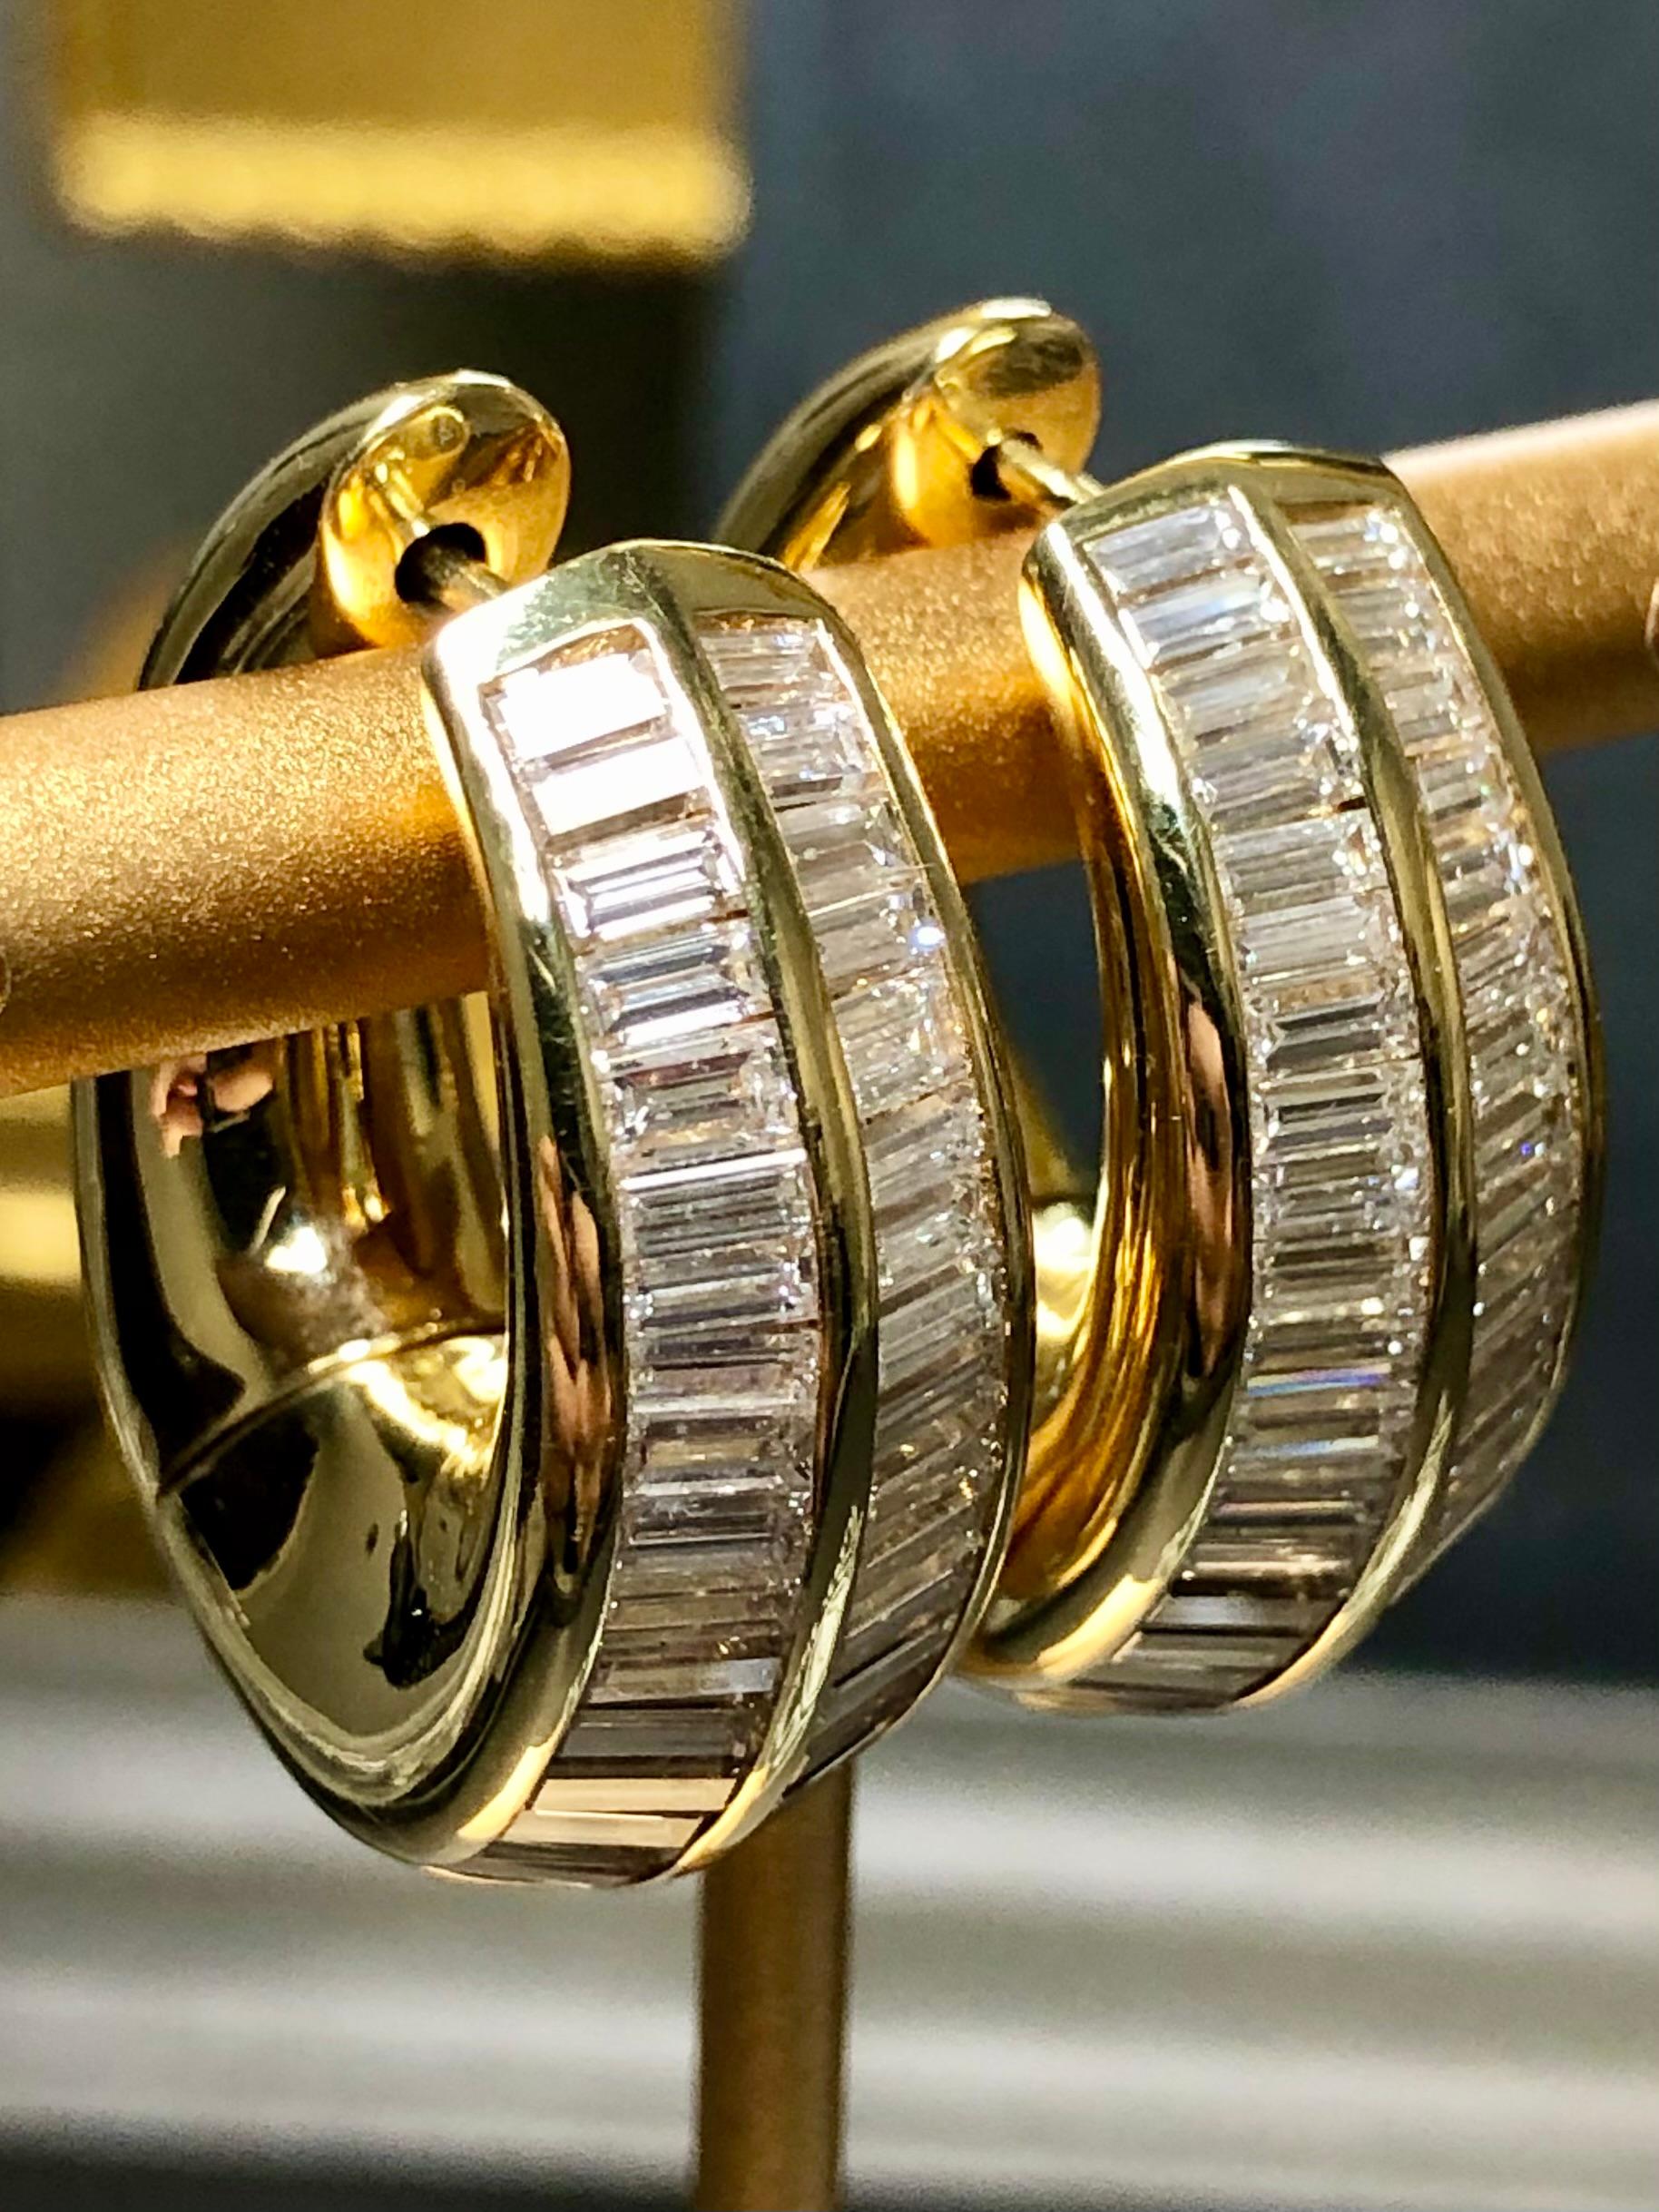 An impressive pair of hoop earrings by maker “MARCO VALENTE” done in 18K yellow gold and set with graduated baguette diamonds with an approximate total weight of 8cttw with all stones being G-H color and Vs1-2 clarity.

Dimensions/Weight
1” long and